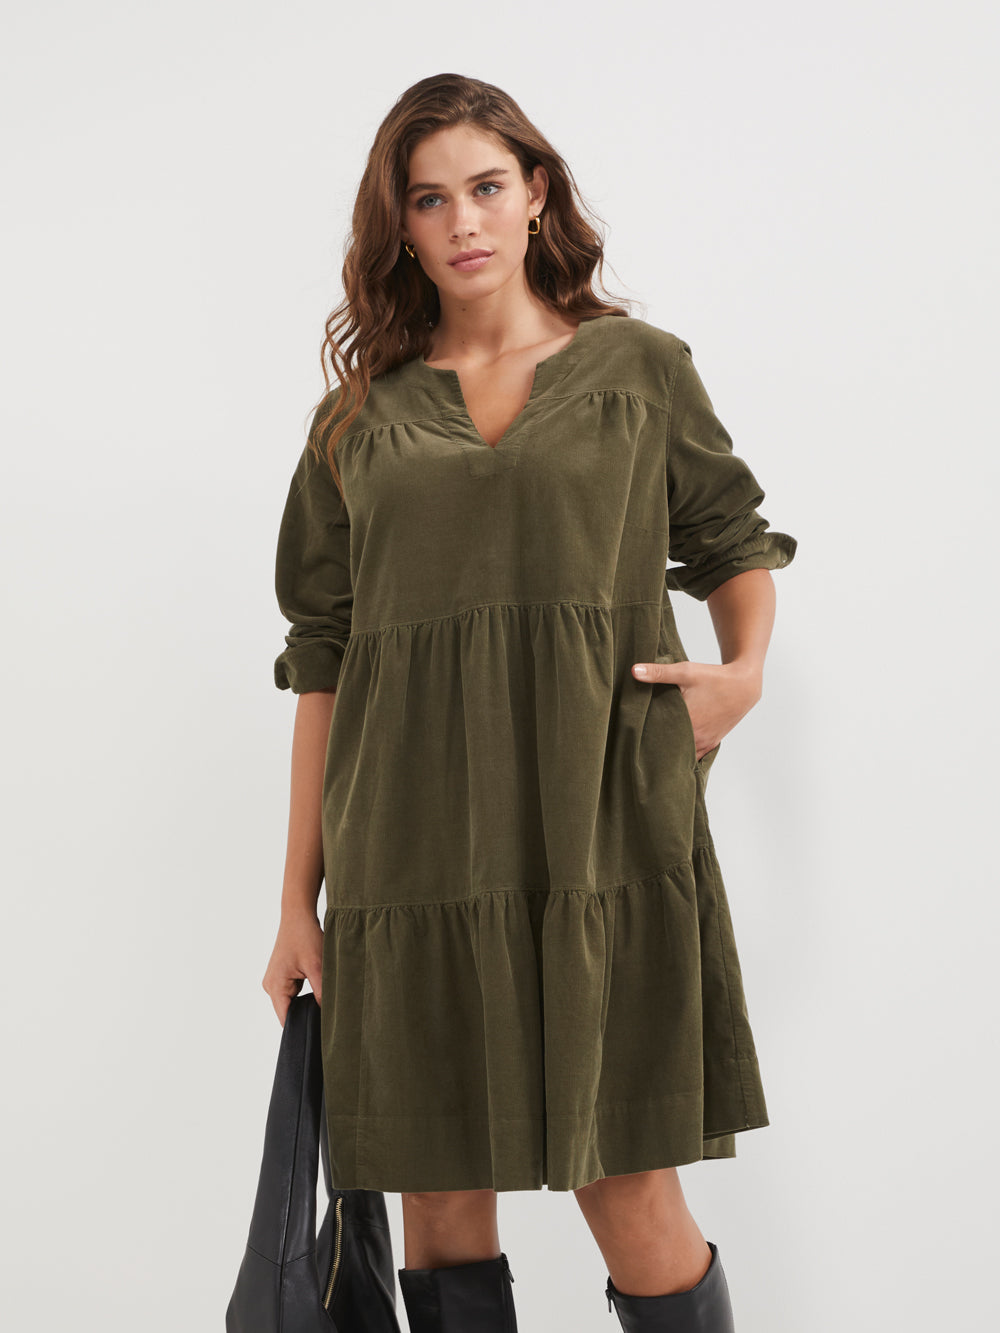 The Soft Washed Cord Dress